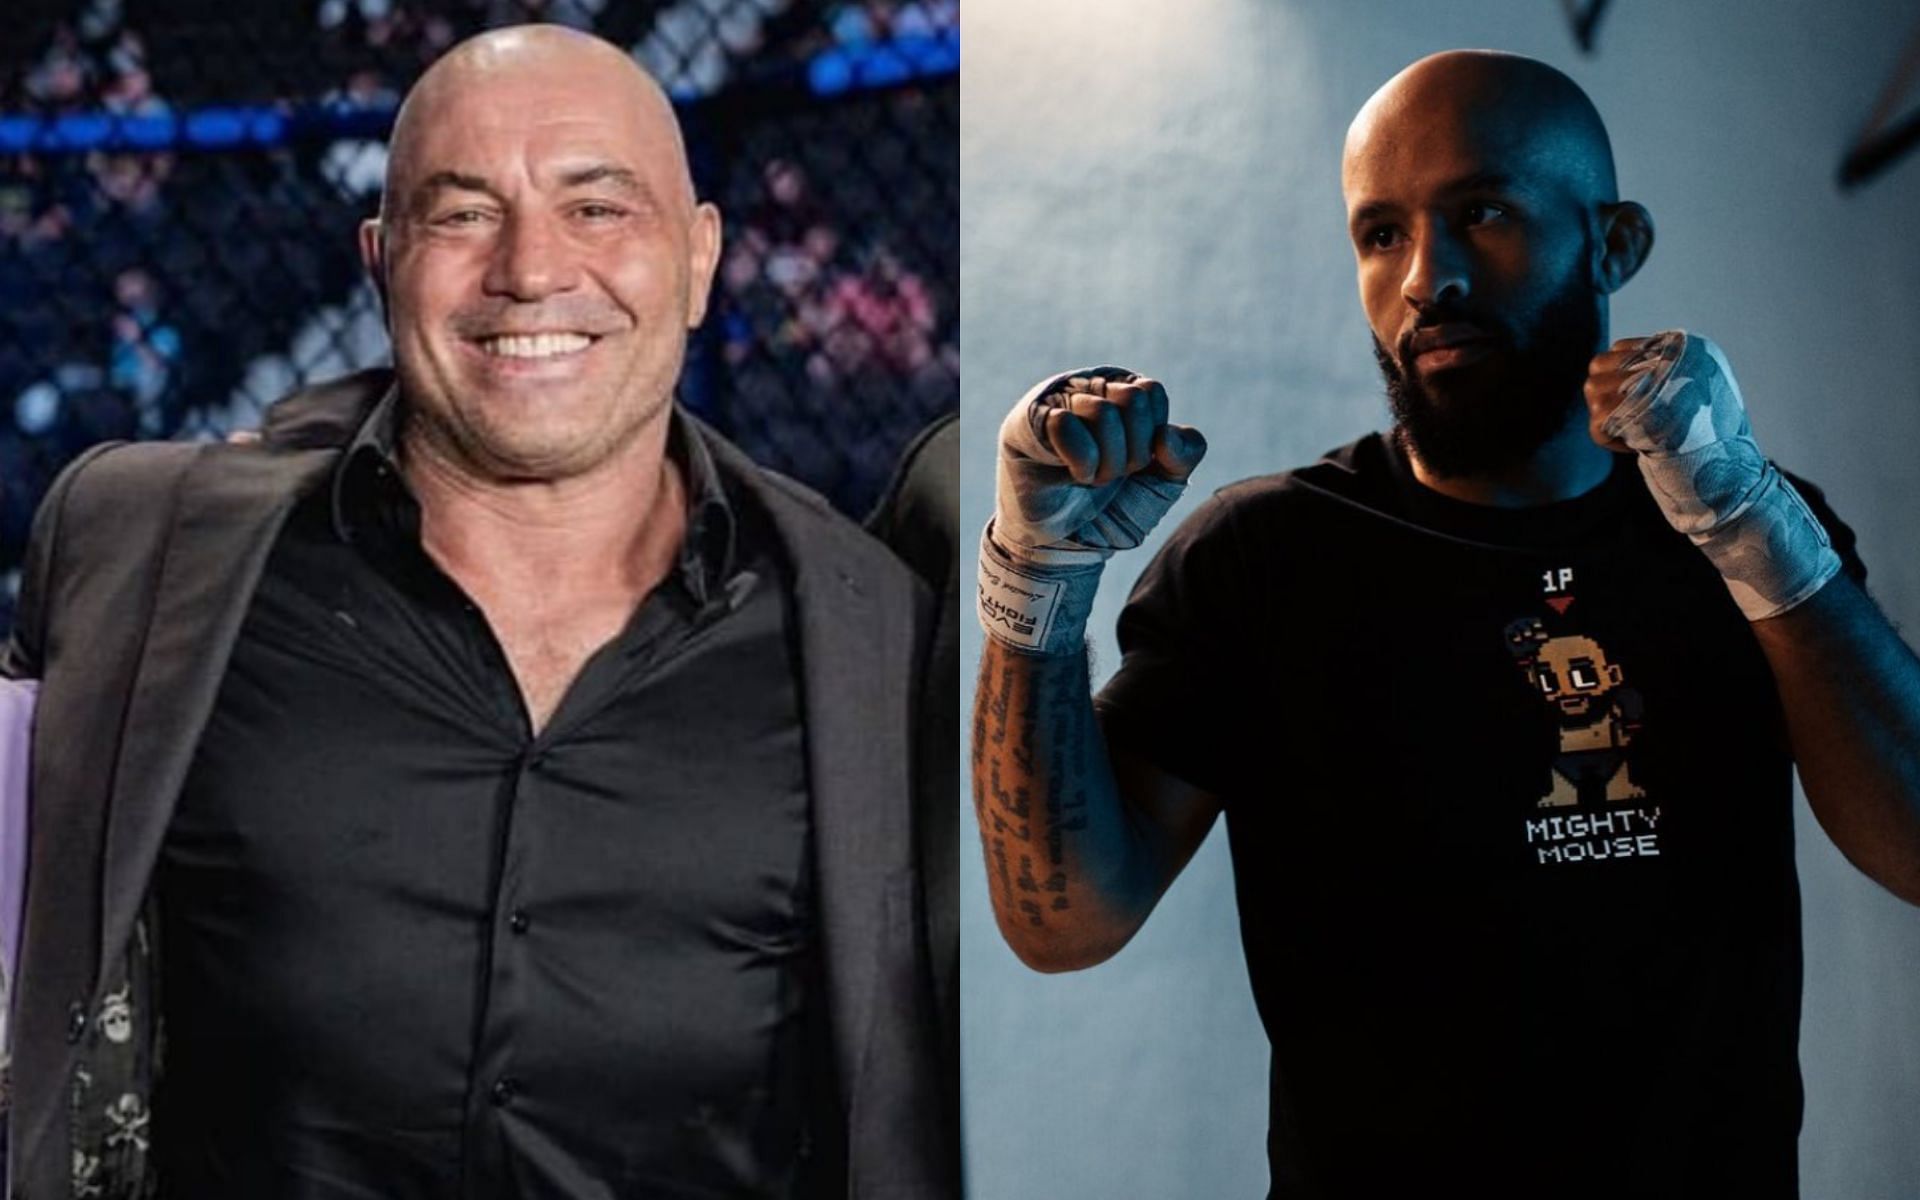 Joe Rogan (left) and Demetrious Johnson (right). (Images from @joerogan and @mighty Instagram)